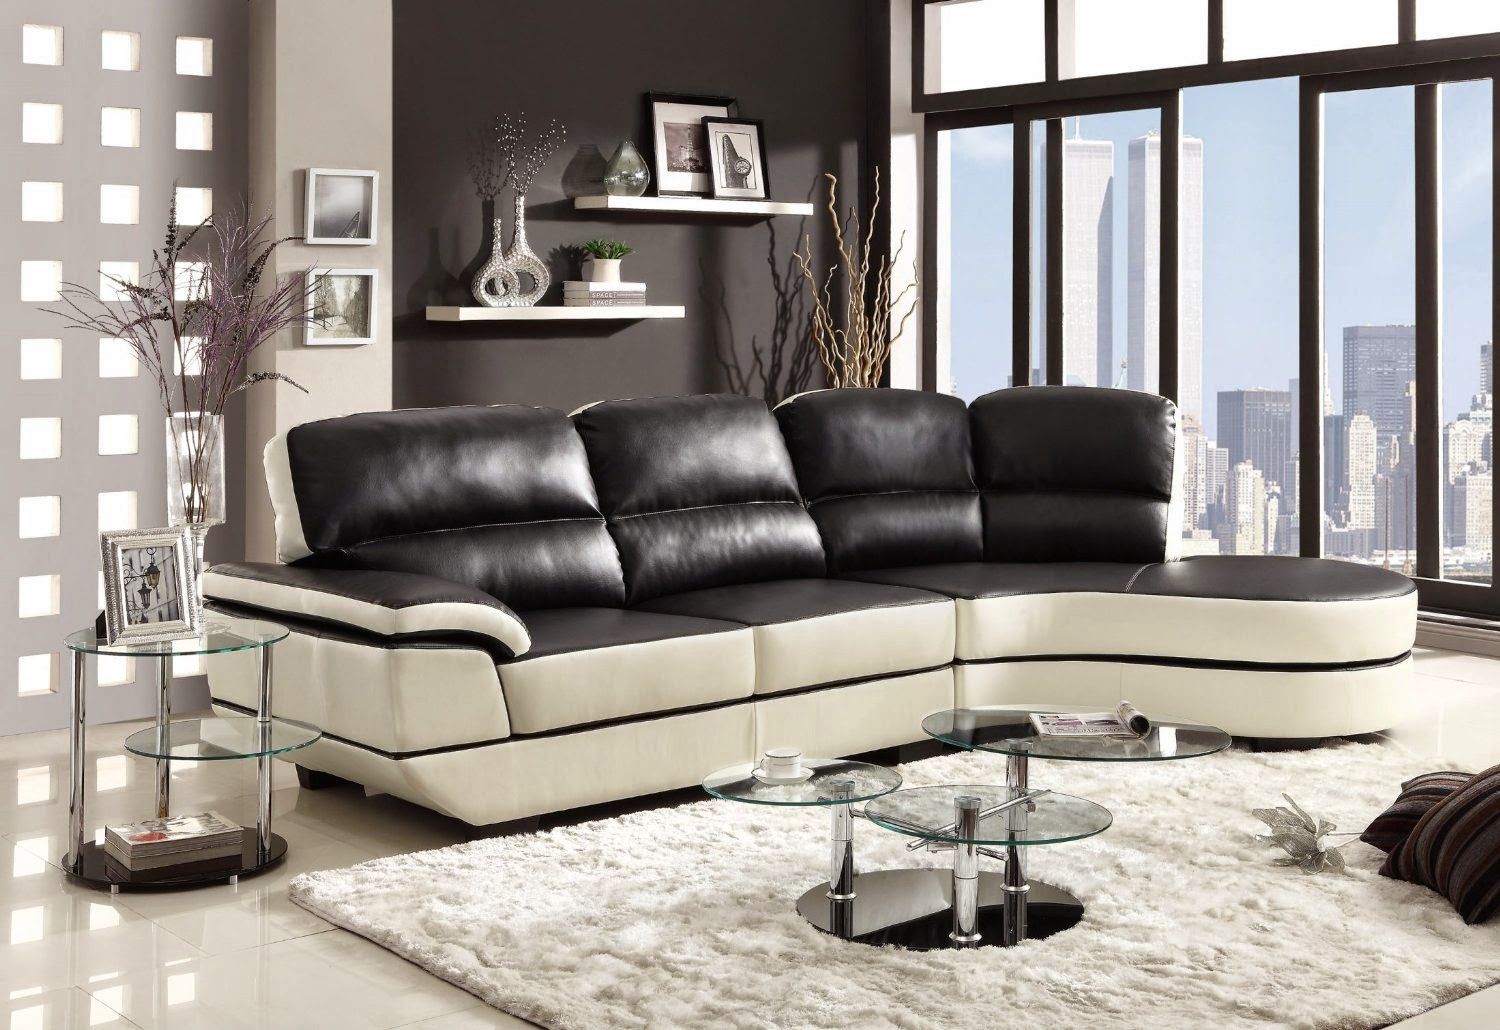 Curved Sofa Website Reviews: Curved Sectional Sofa With Chaise With Regard To 4pc Crowningshield Contemporary Chaise Sectional Sofas (View 4 of 15)